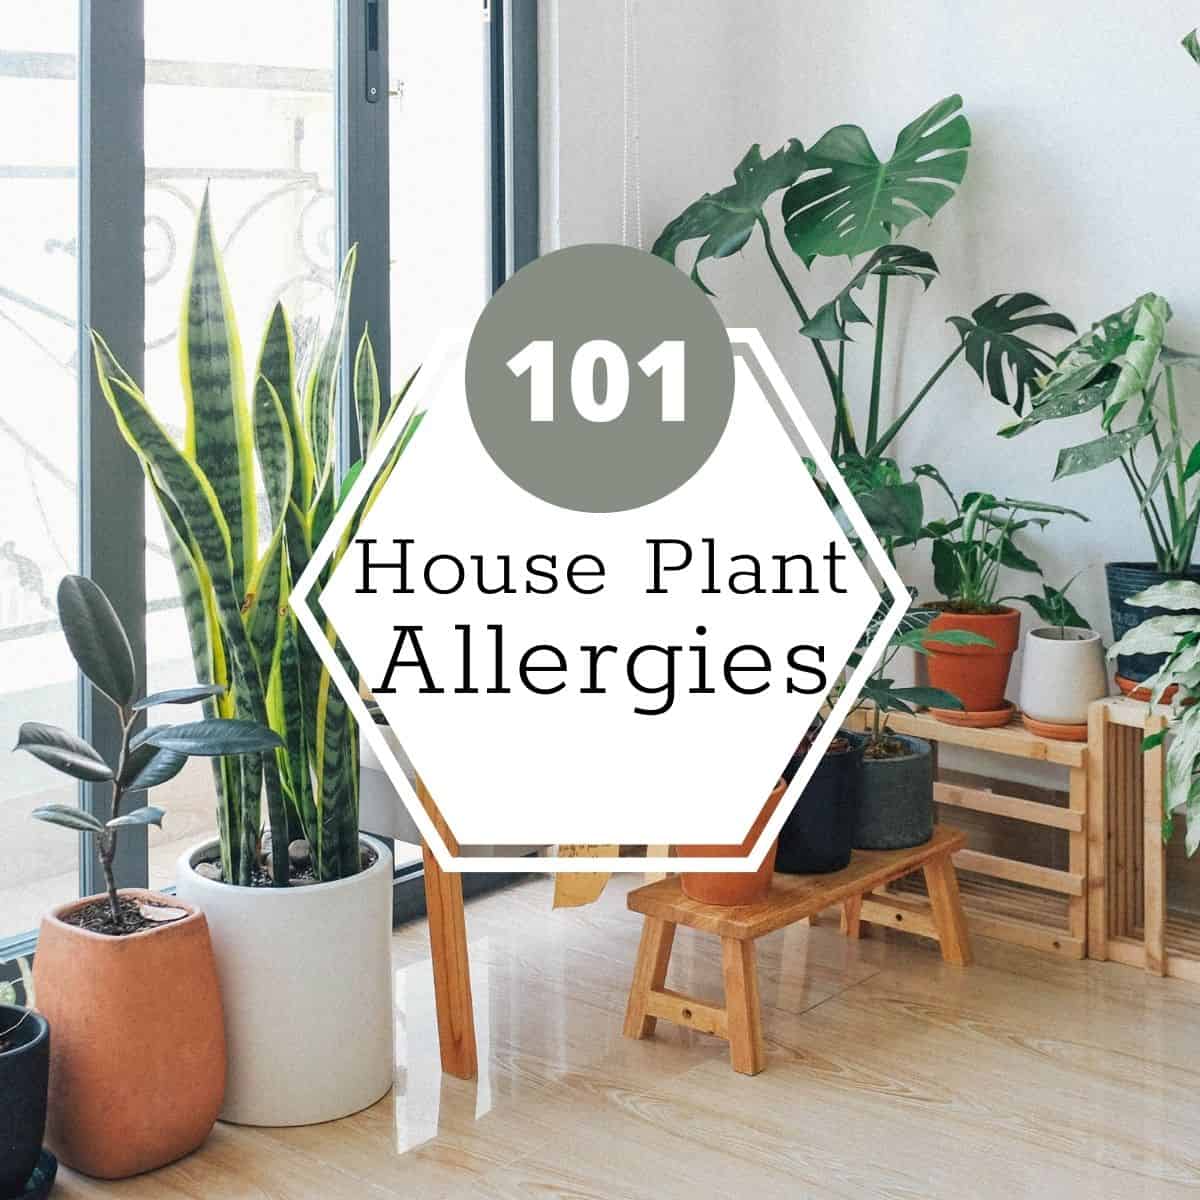 A light and bright room filled with different types of plants in various pots. A white hexagon with text in the middle reads, "house plant allergies 101".